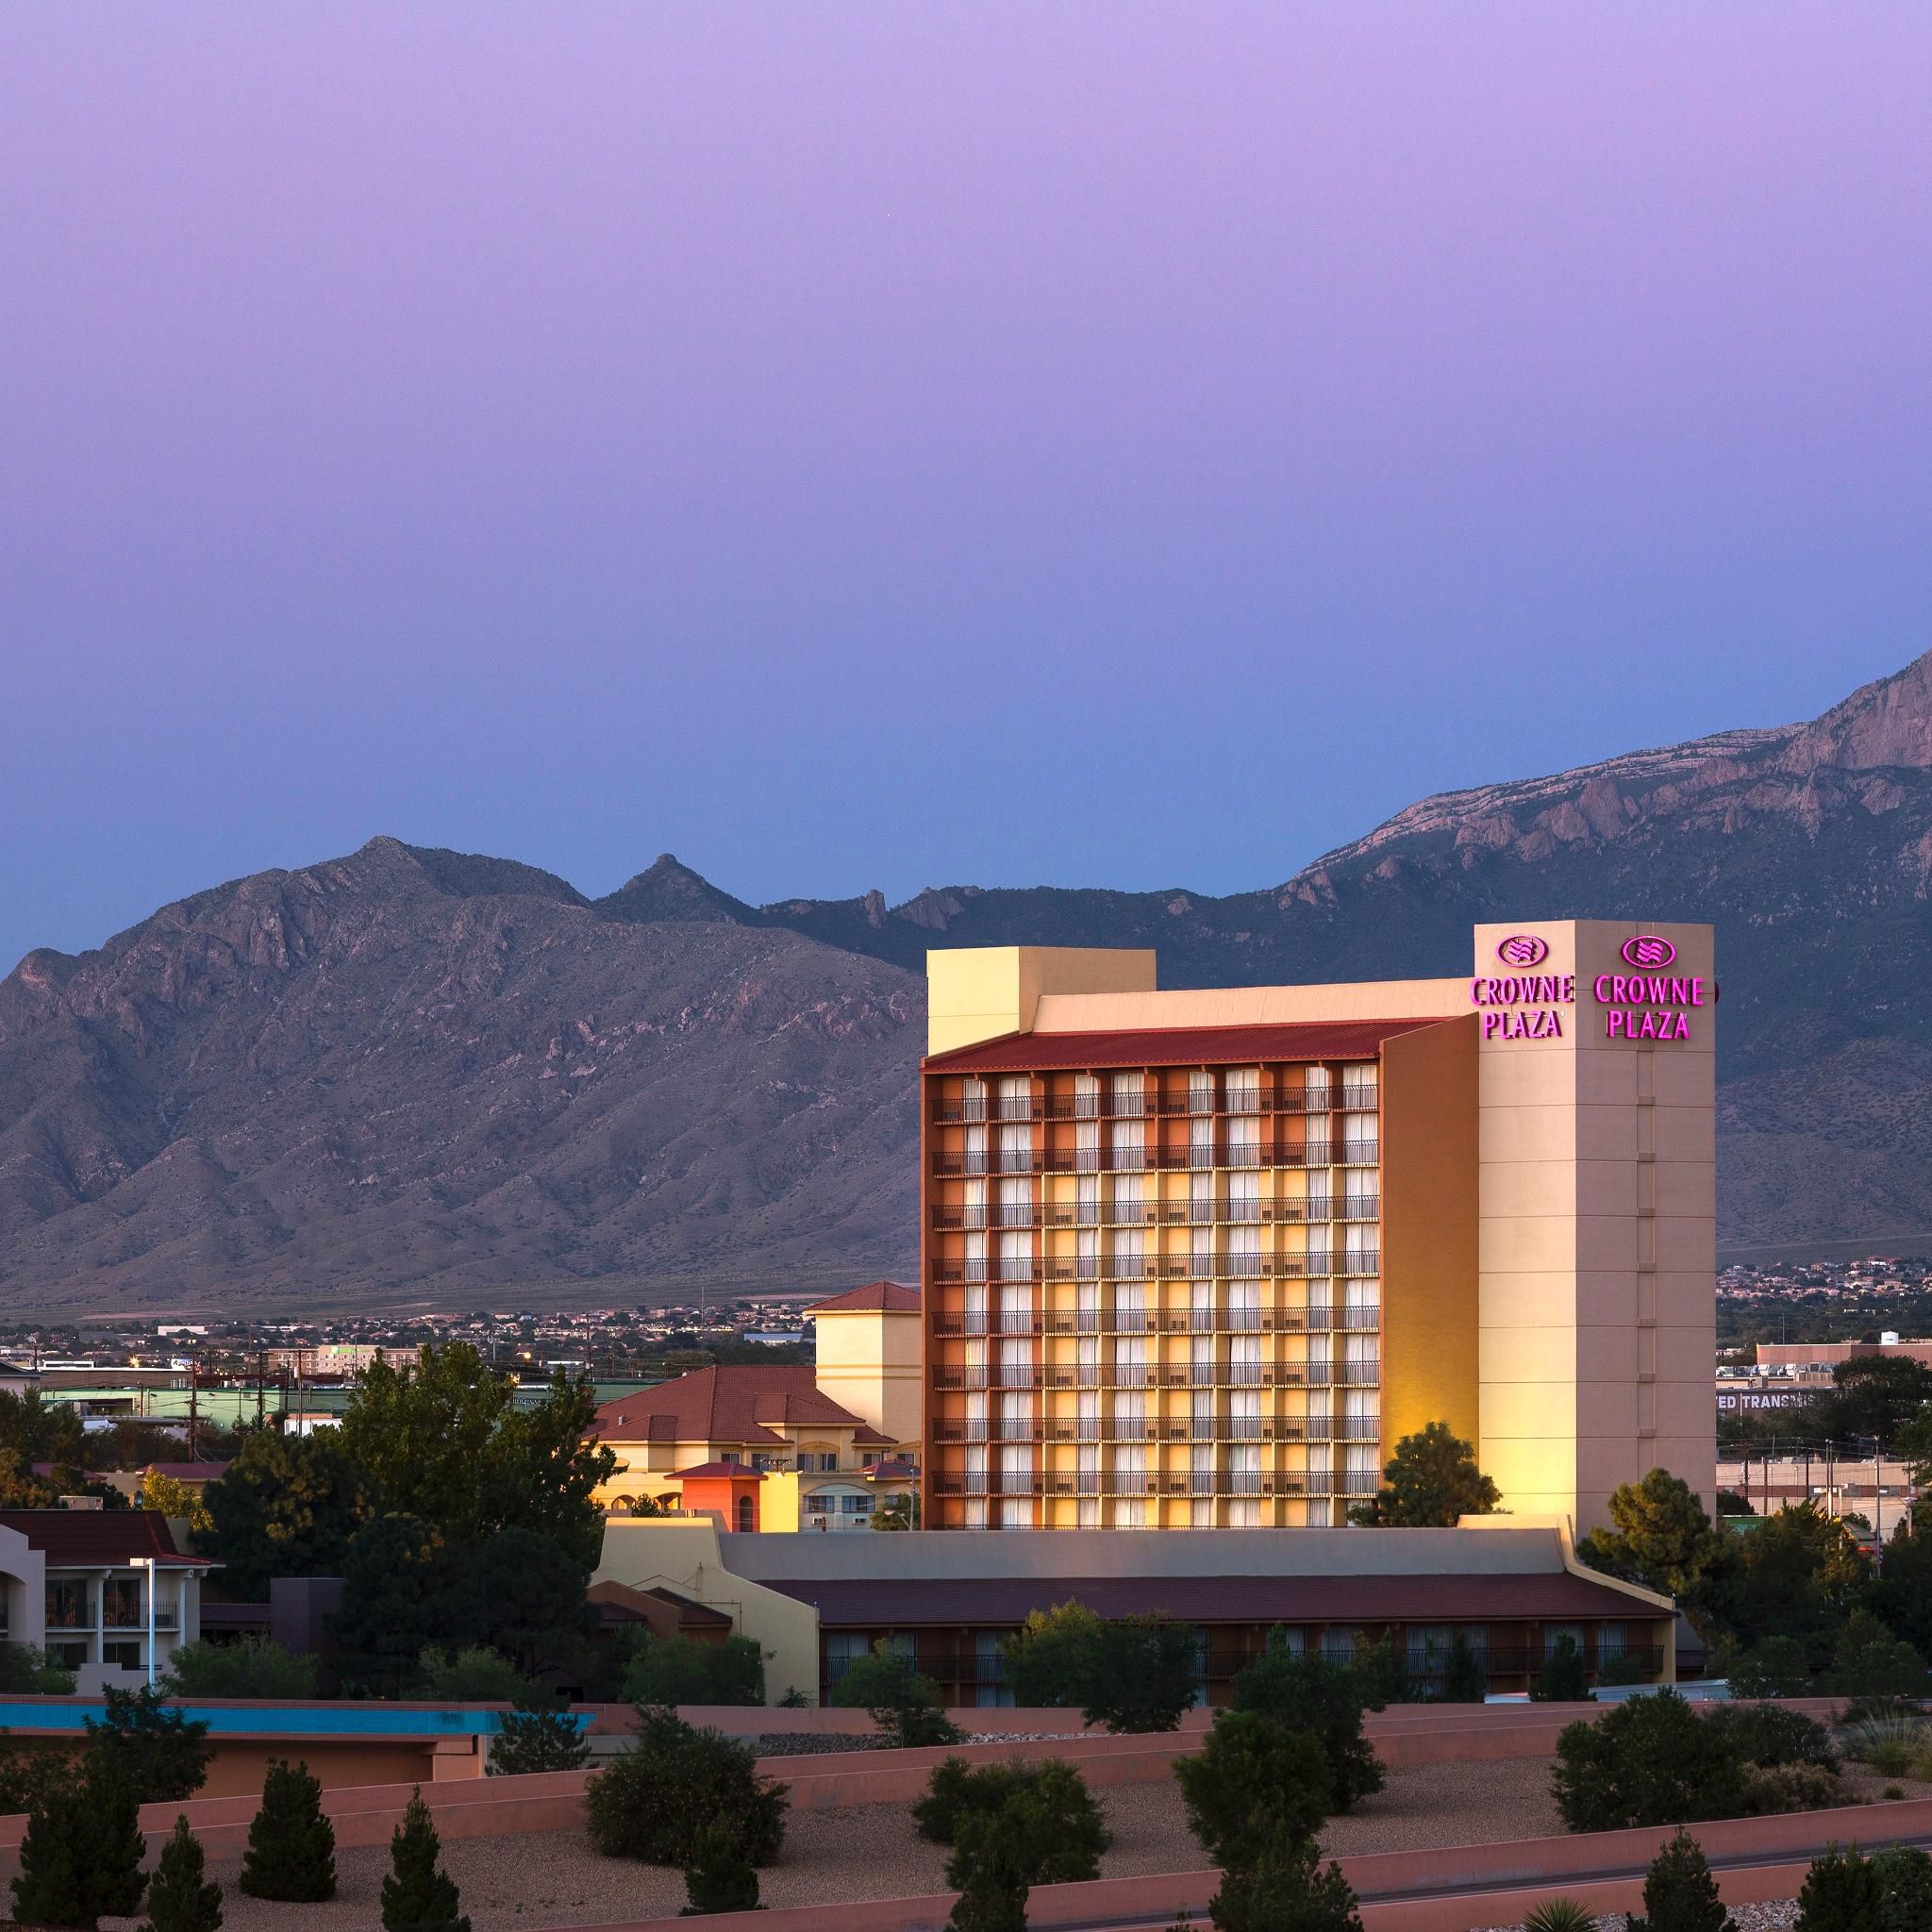 Welcome to the Crowne Plaza Albuquerque!